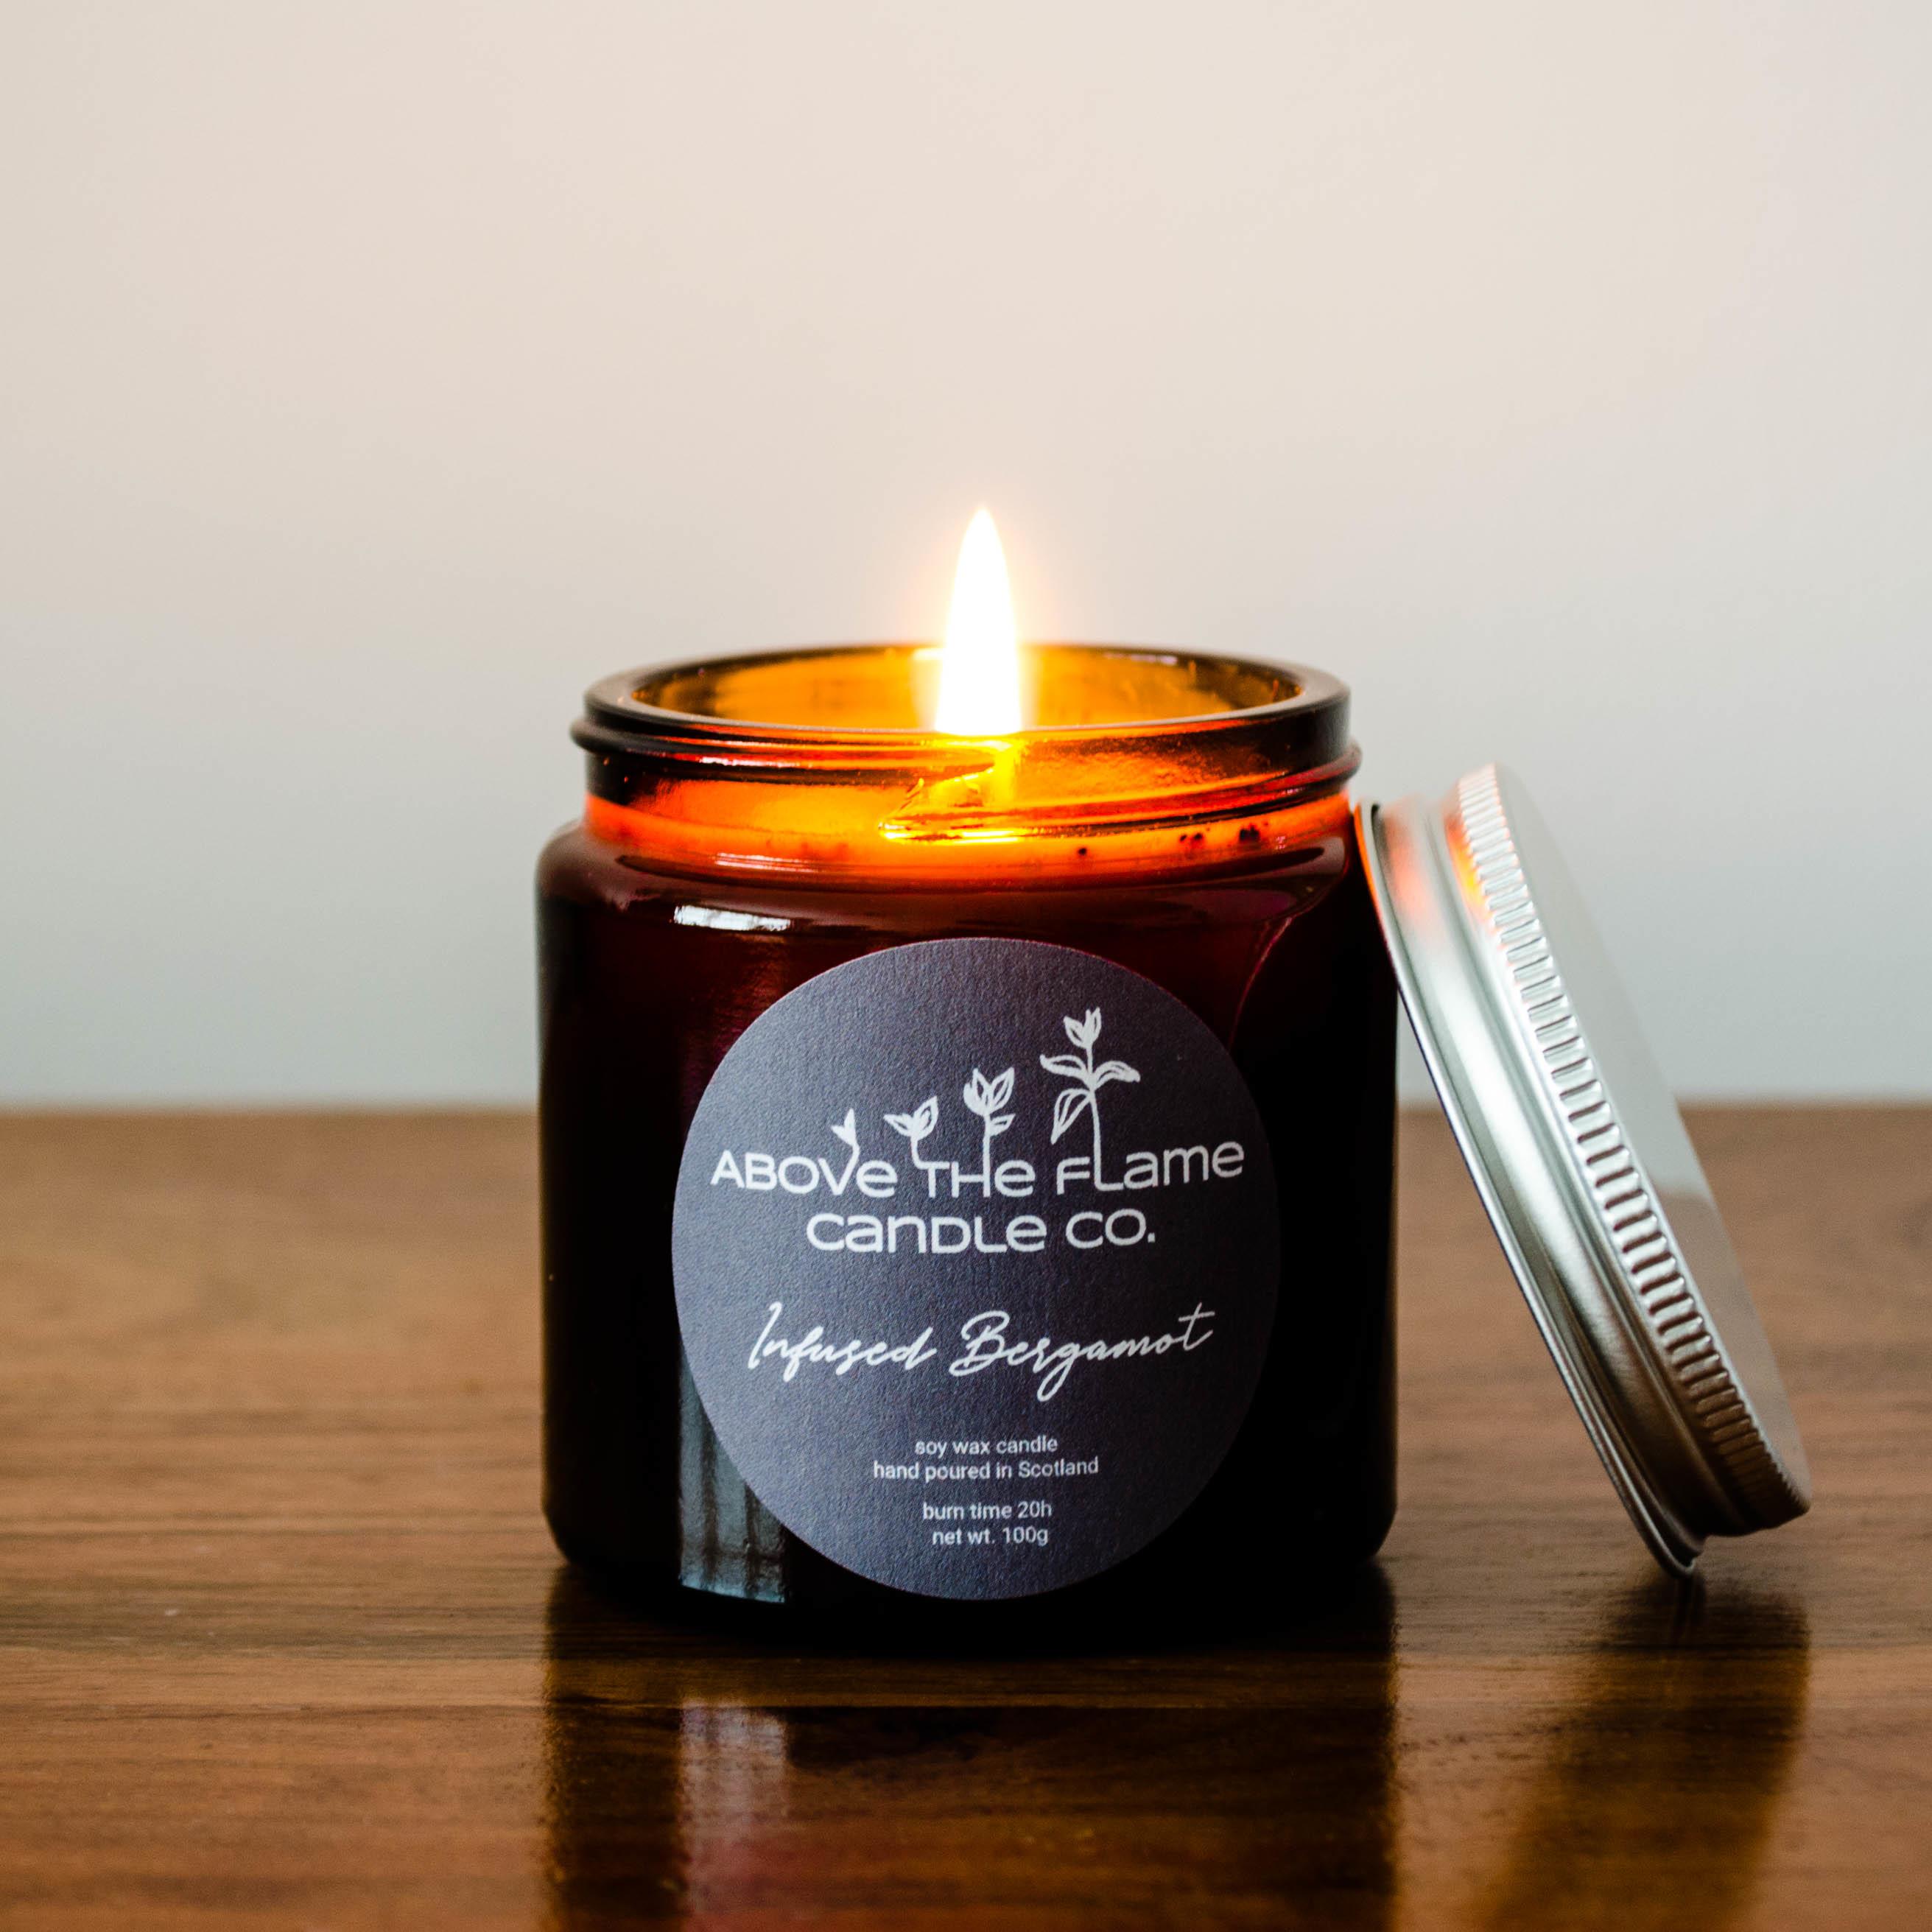 A lit infused bergamot amber soy wax candle jar handmade by above the flame candle Co on a wooden table